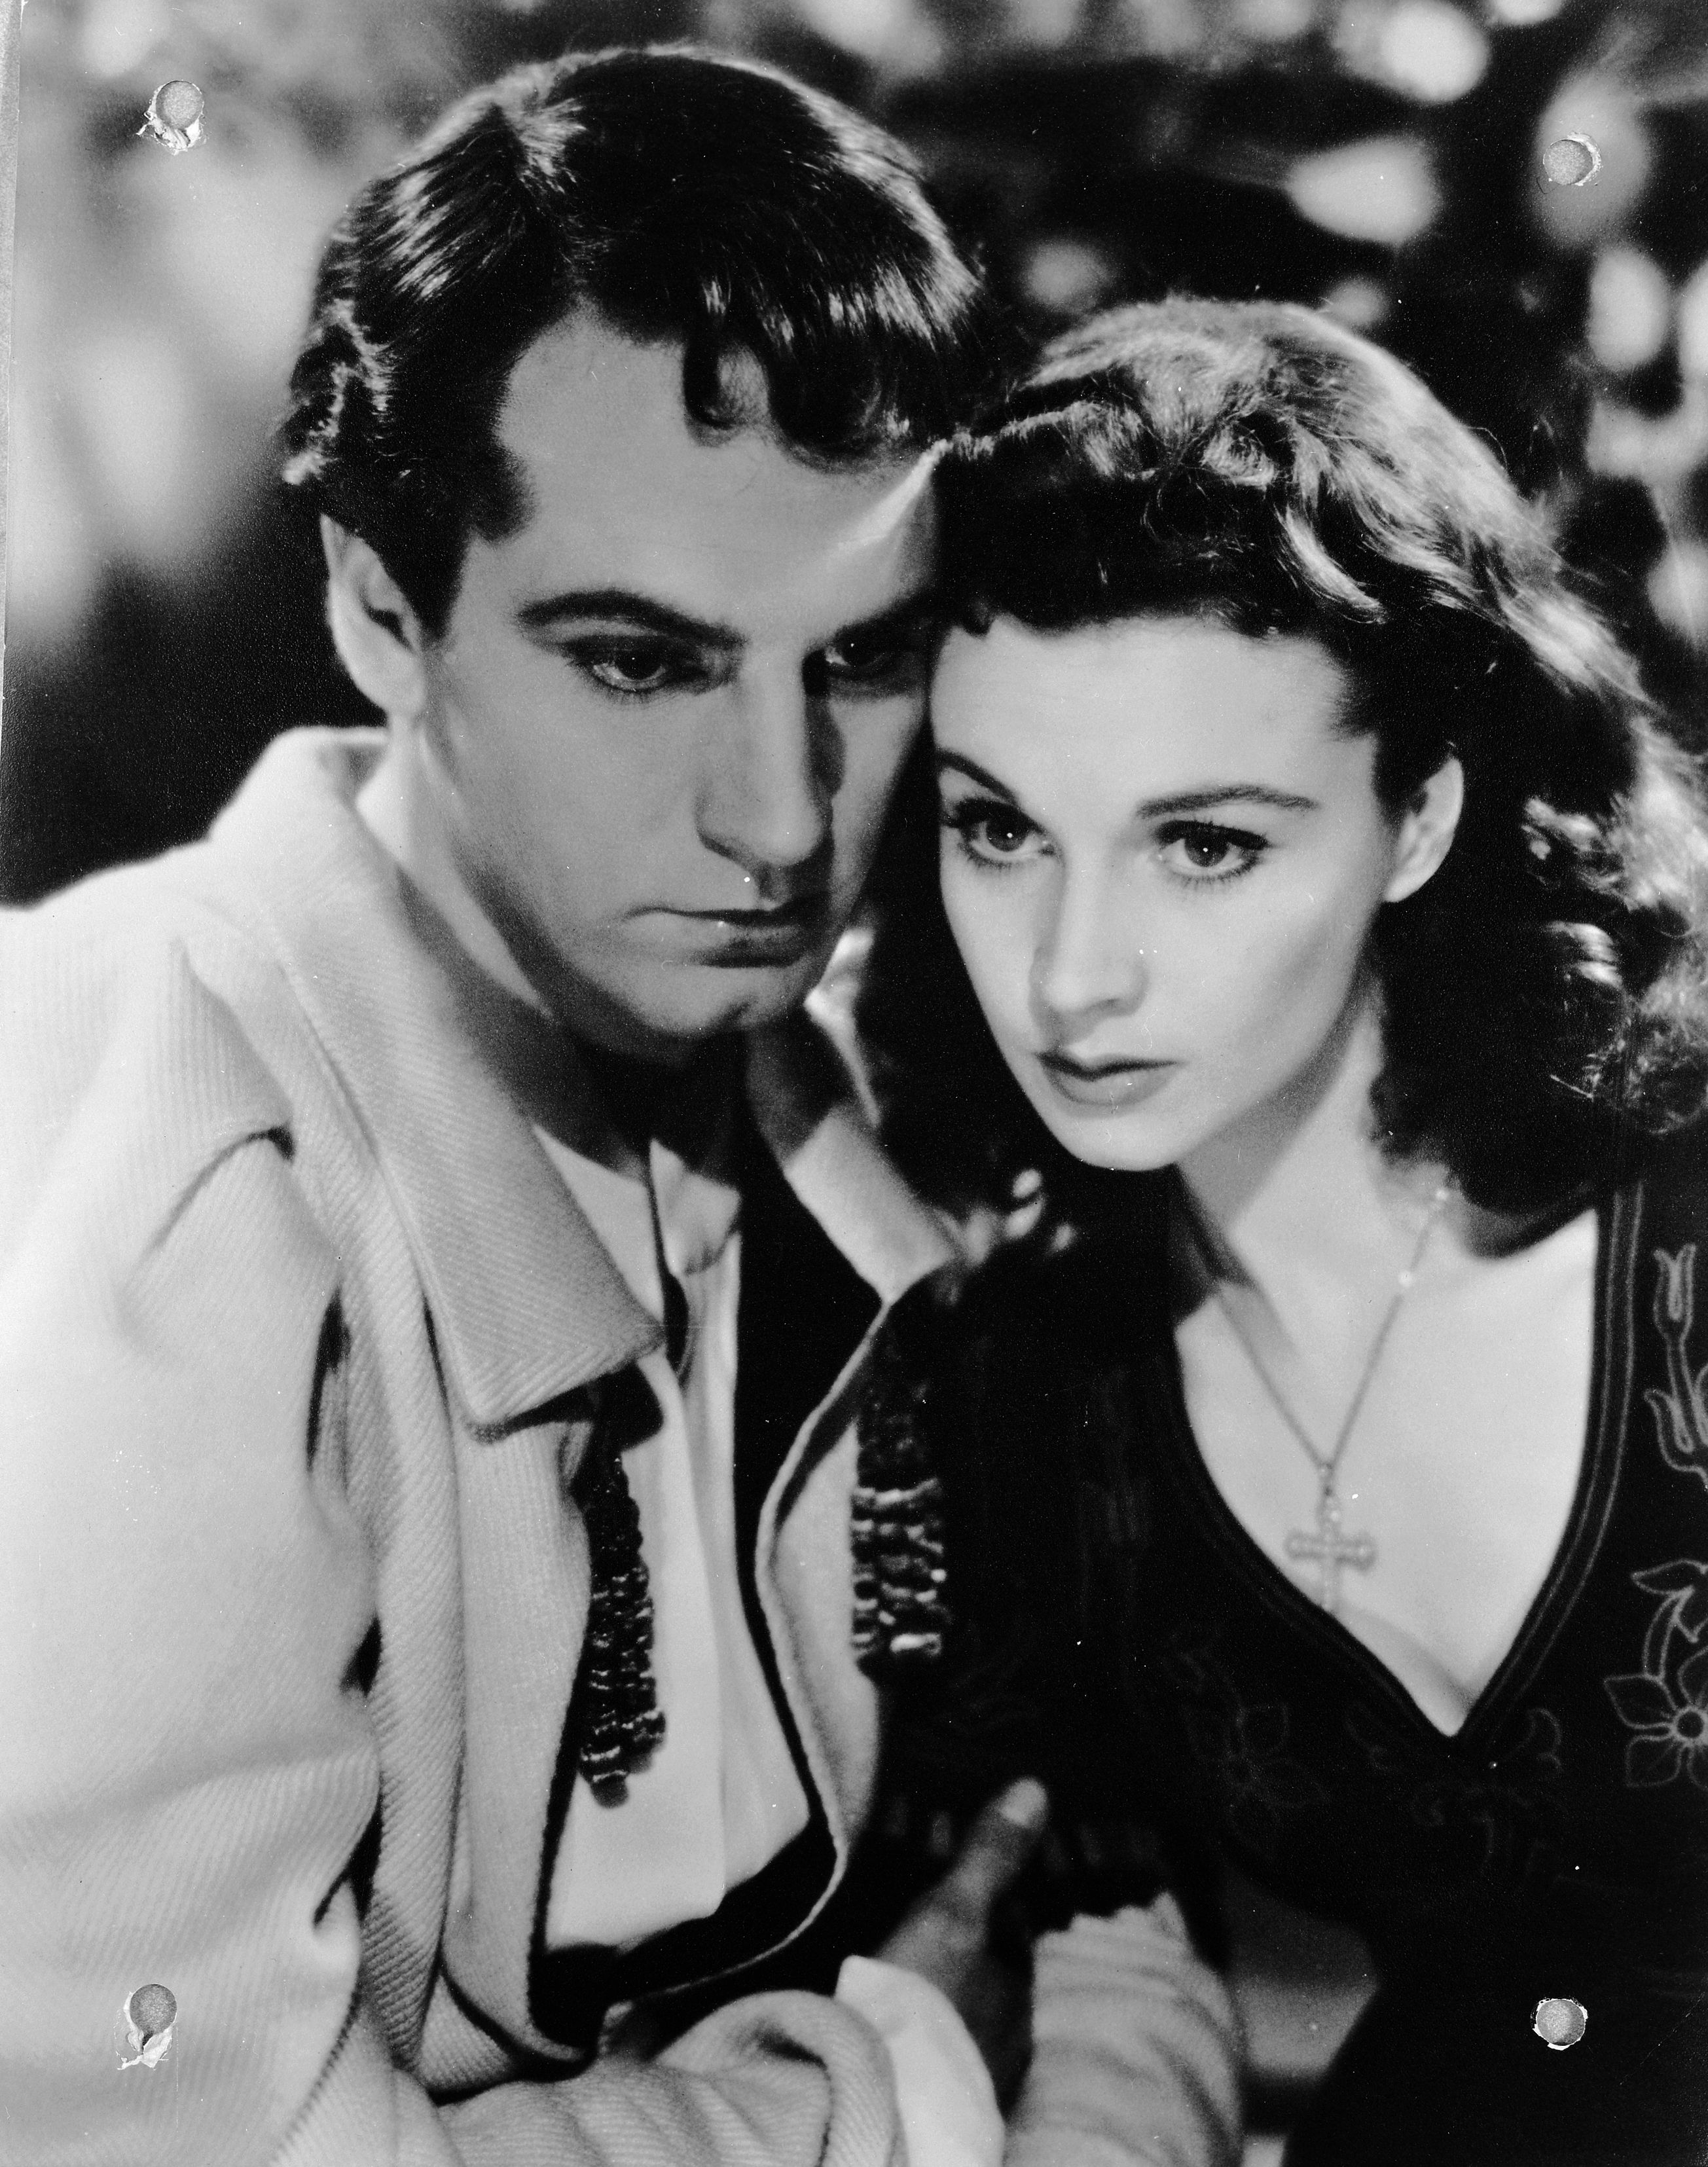 A Timeline of Vivien Leigh and Laurence Oliviers Tragic Love Story as Told Through Love Letters